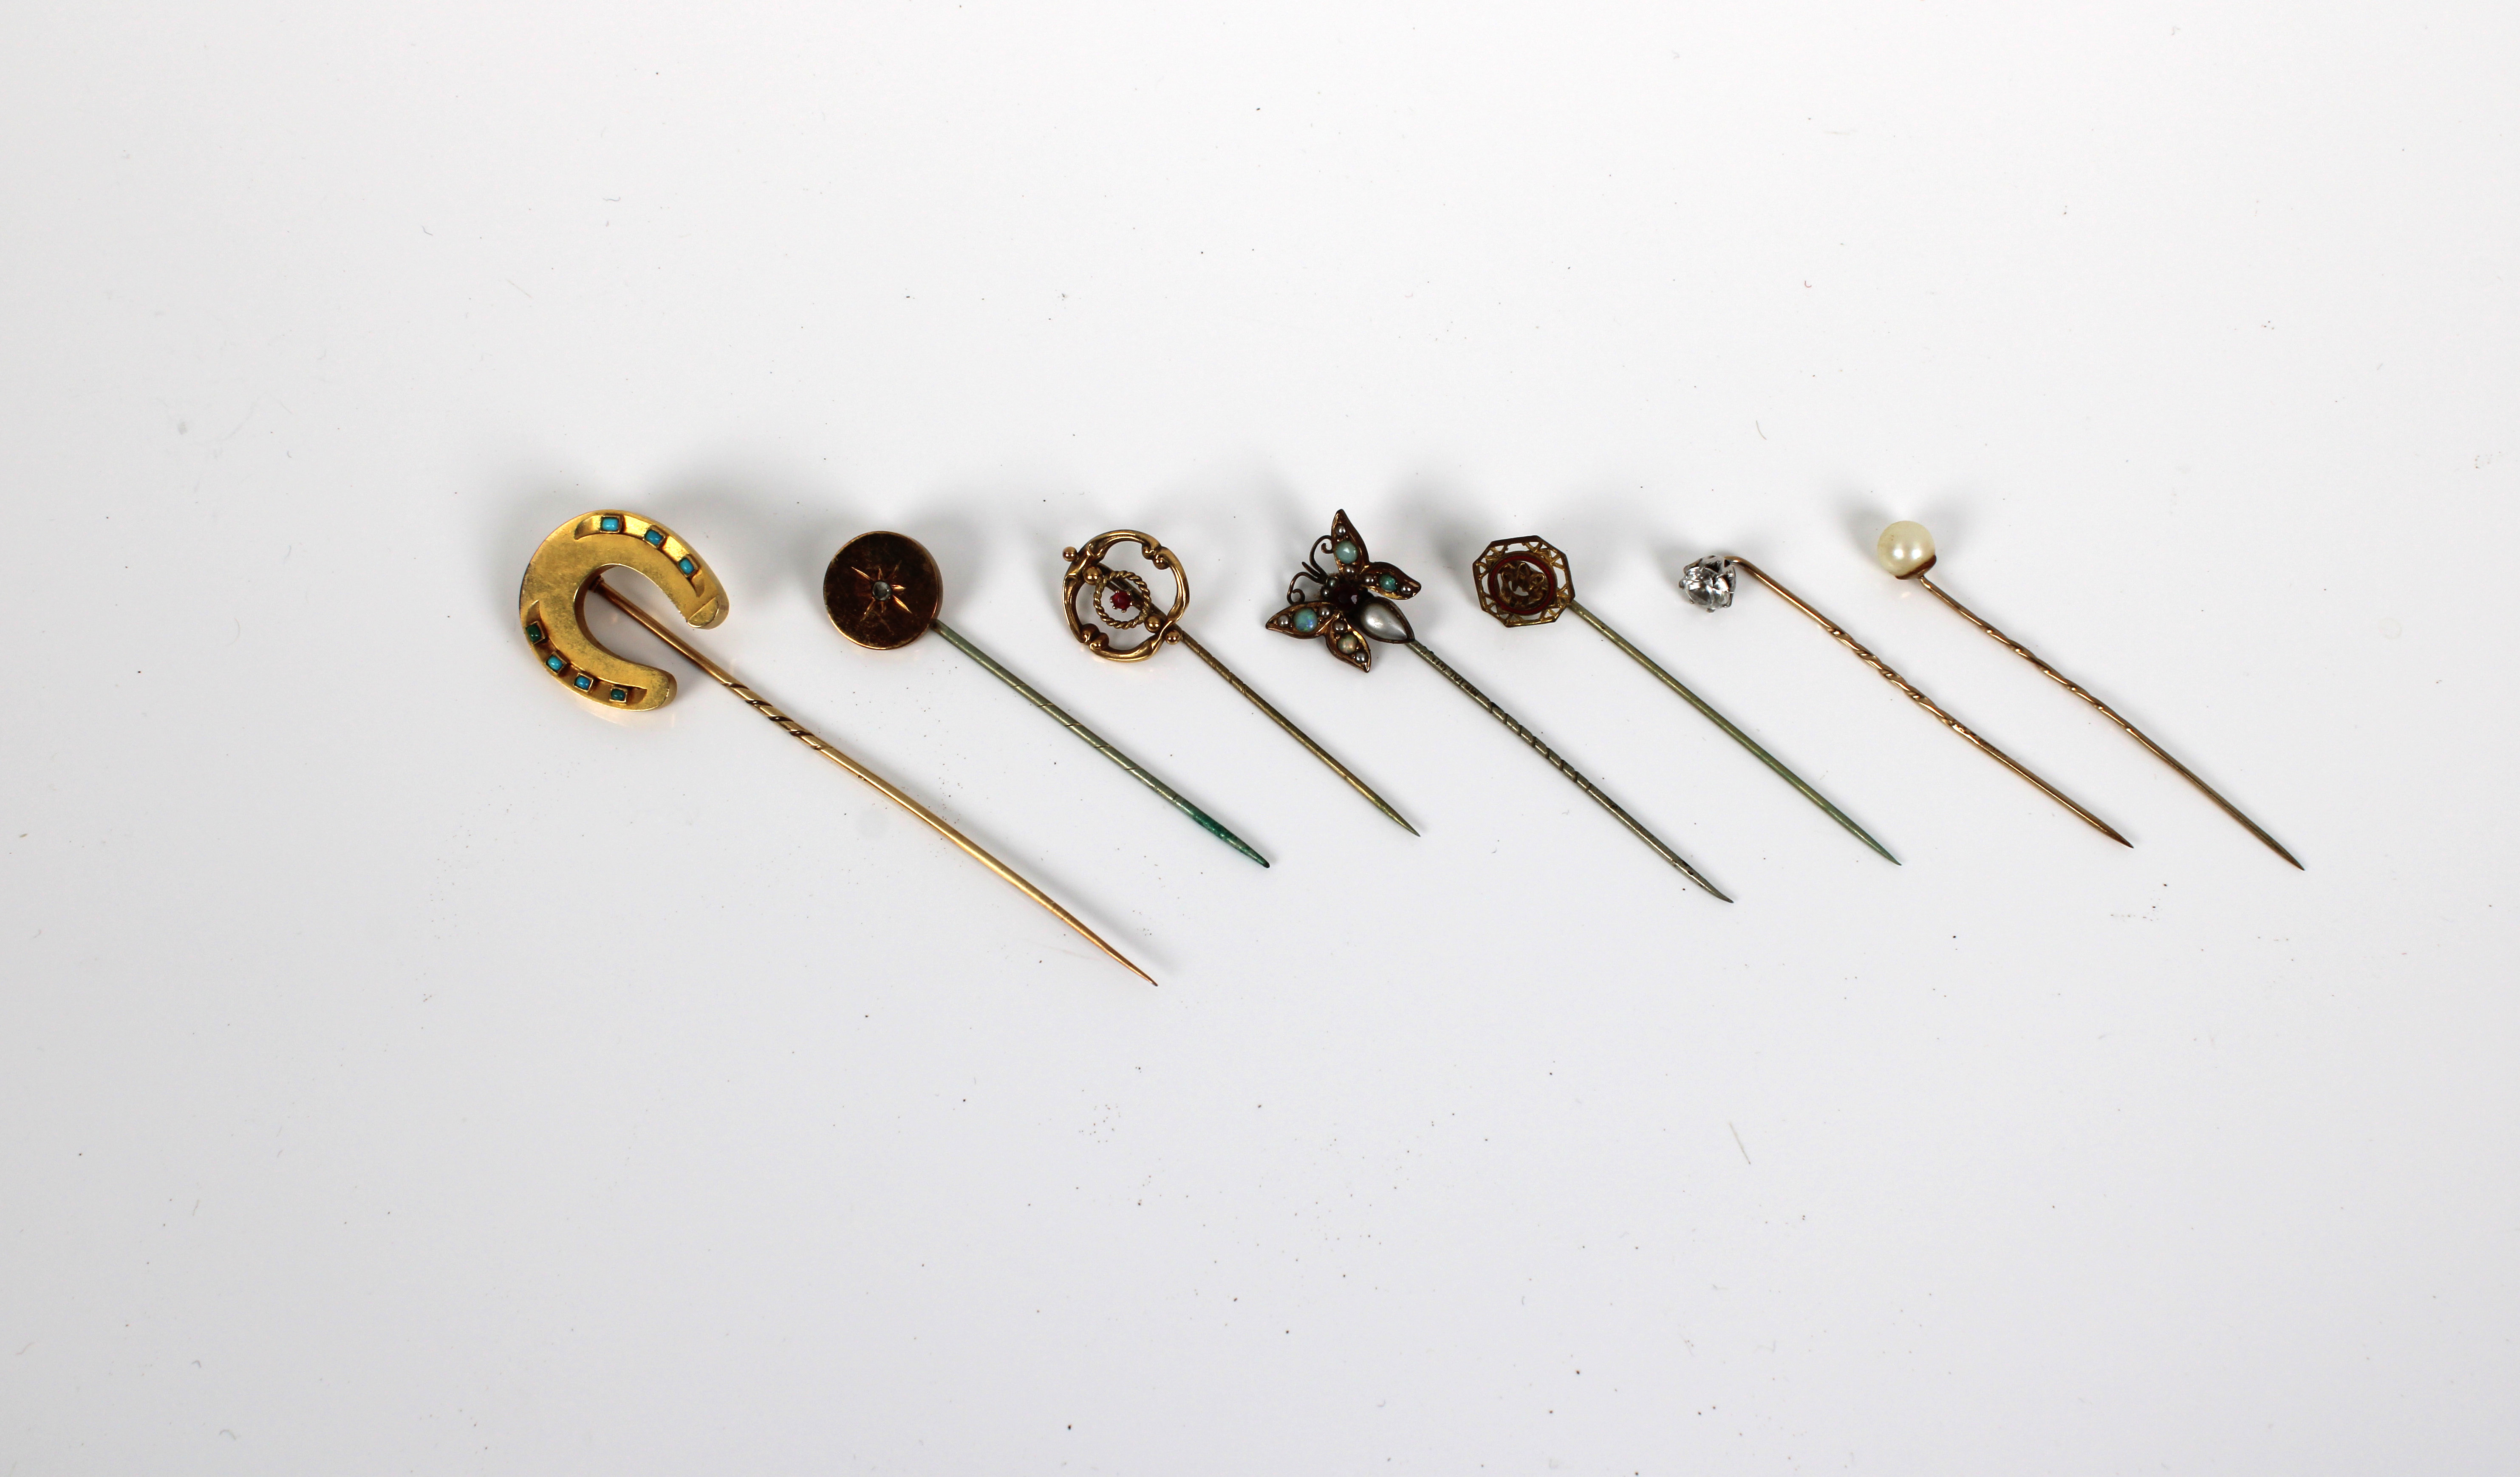 A small collection of yellow metal hat/tie pins